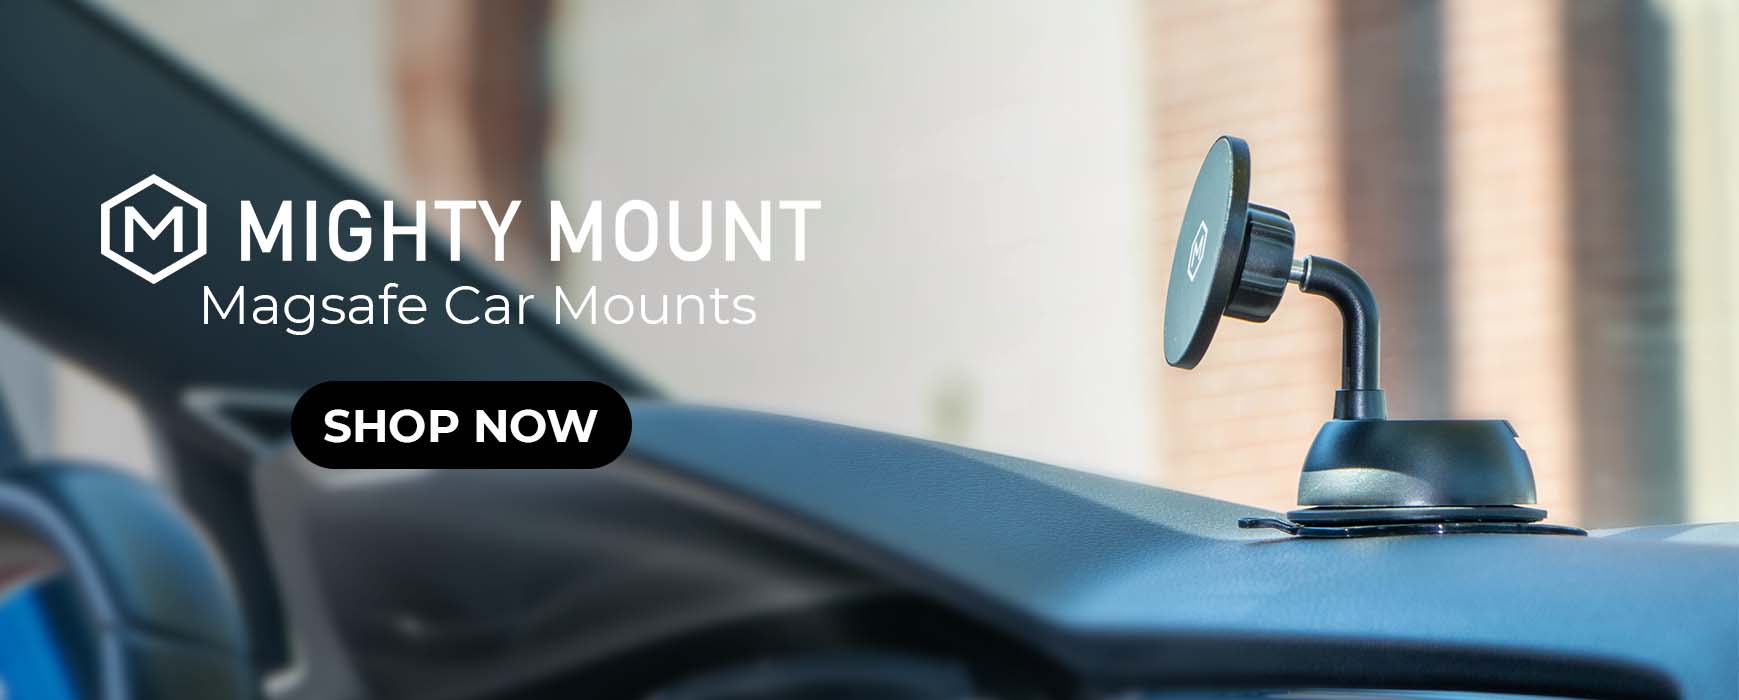 https://www.themightymount.com/collections/magsafe-car-mount